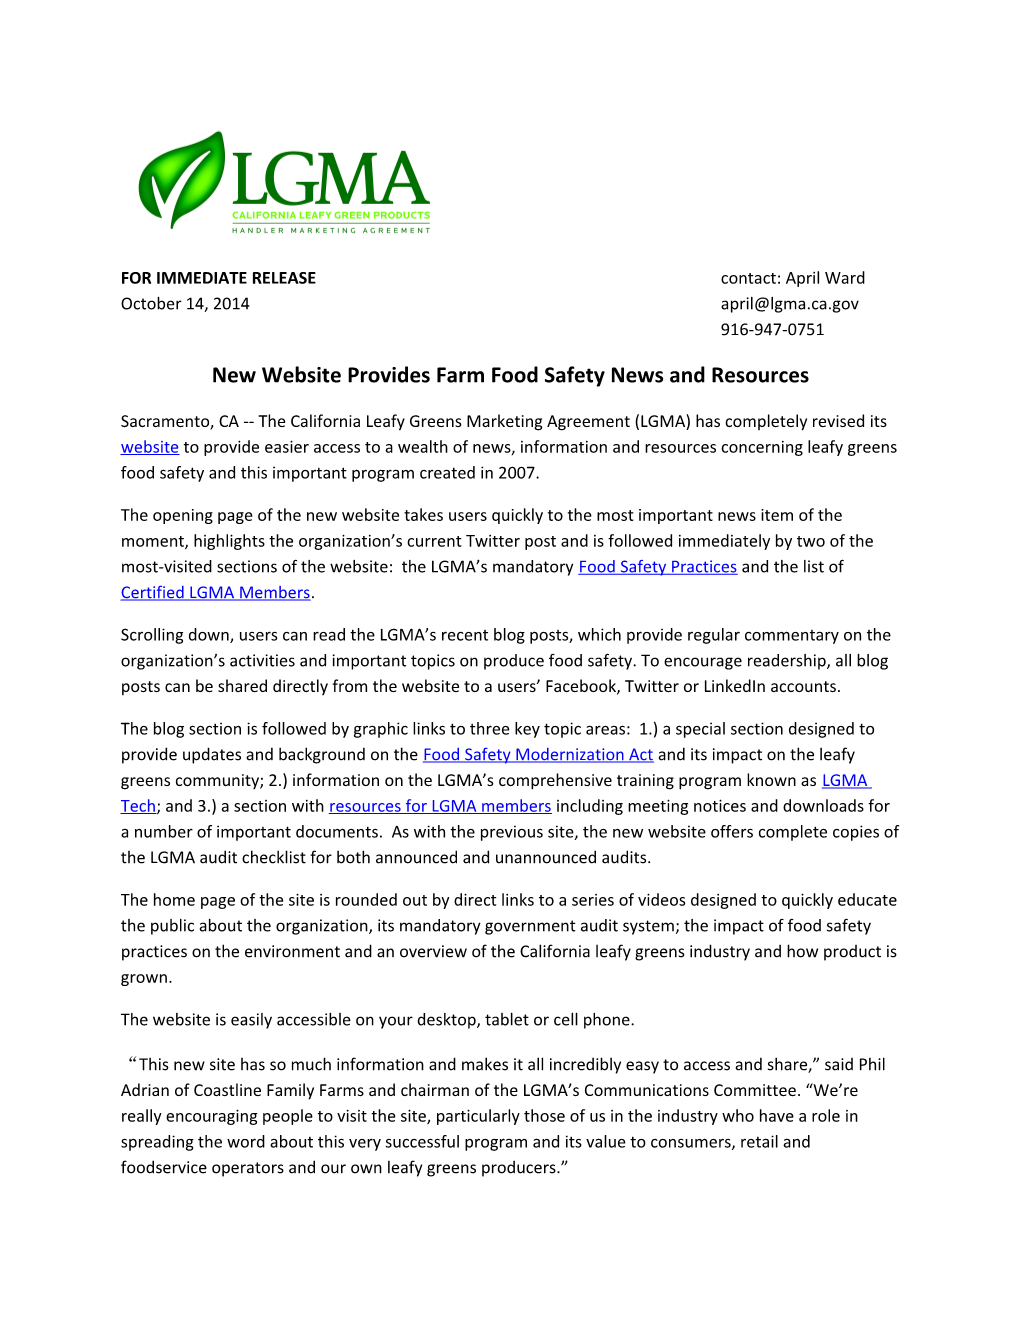 New Website Provides Farm Food Safety News and Resources